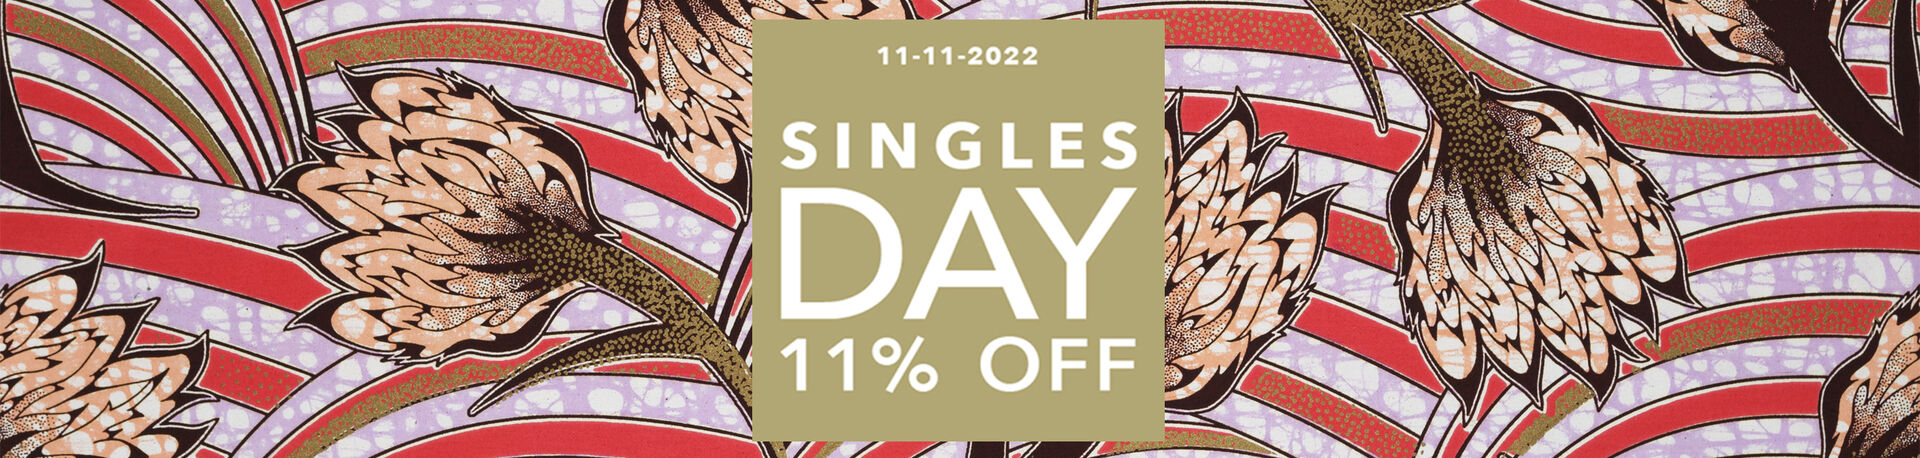 SINGLES DAY SALE